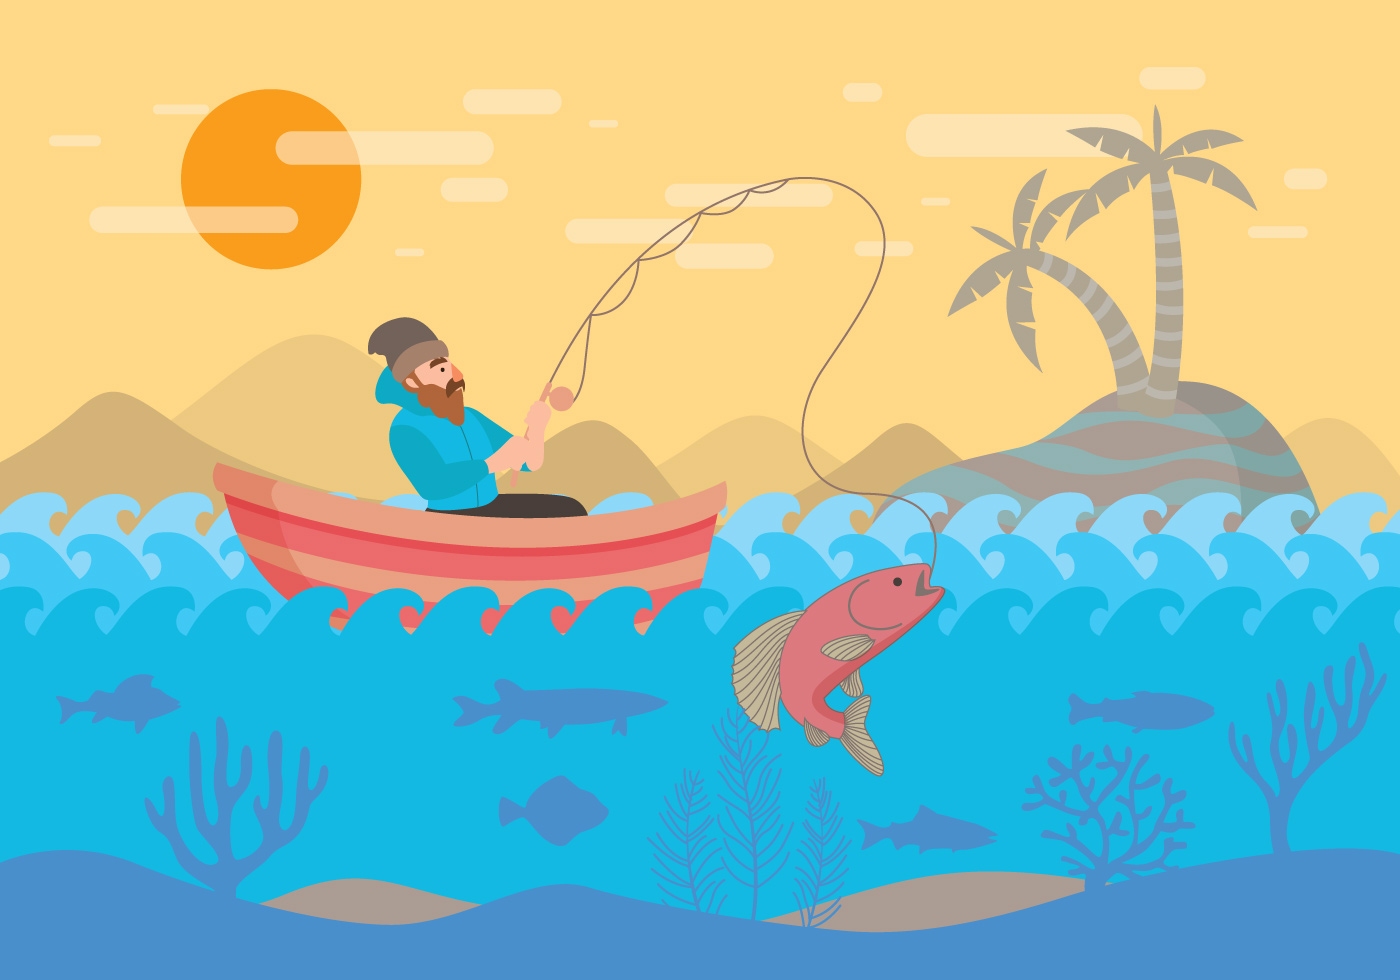 Download Fly Fishing with Boat Vector - Download Free Vectors, Clipart Graphics & Vector Art